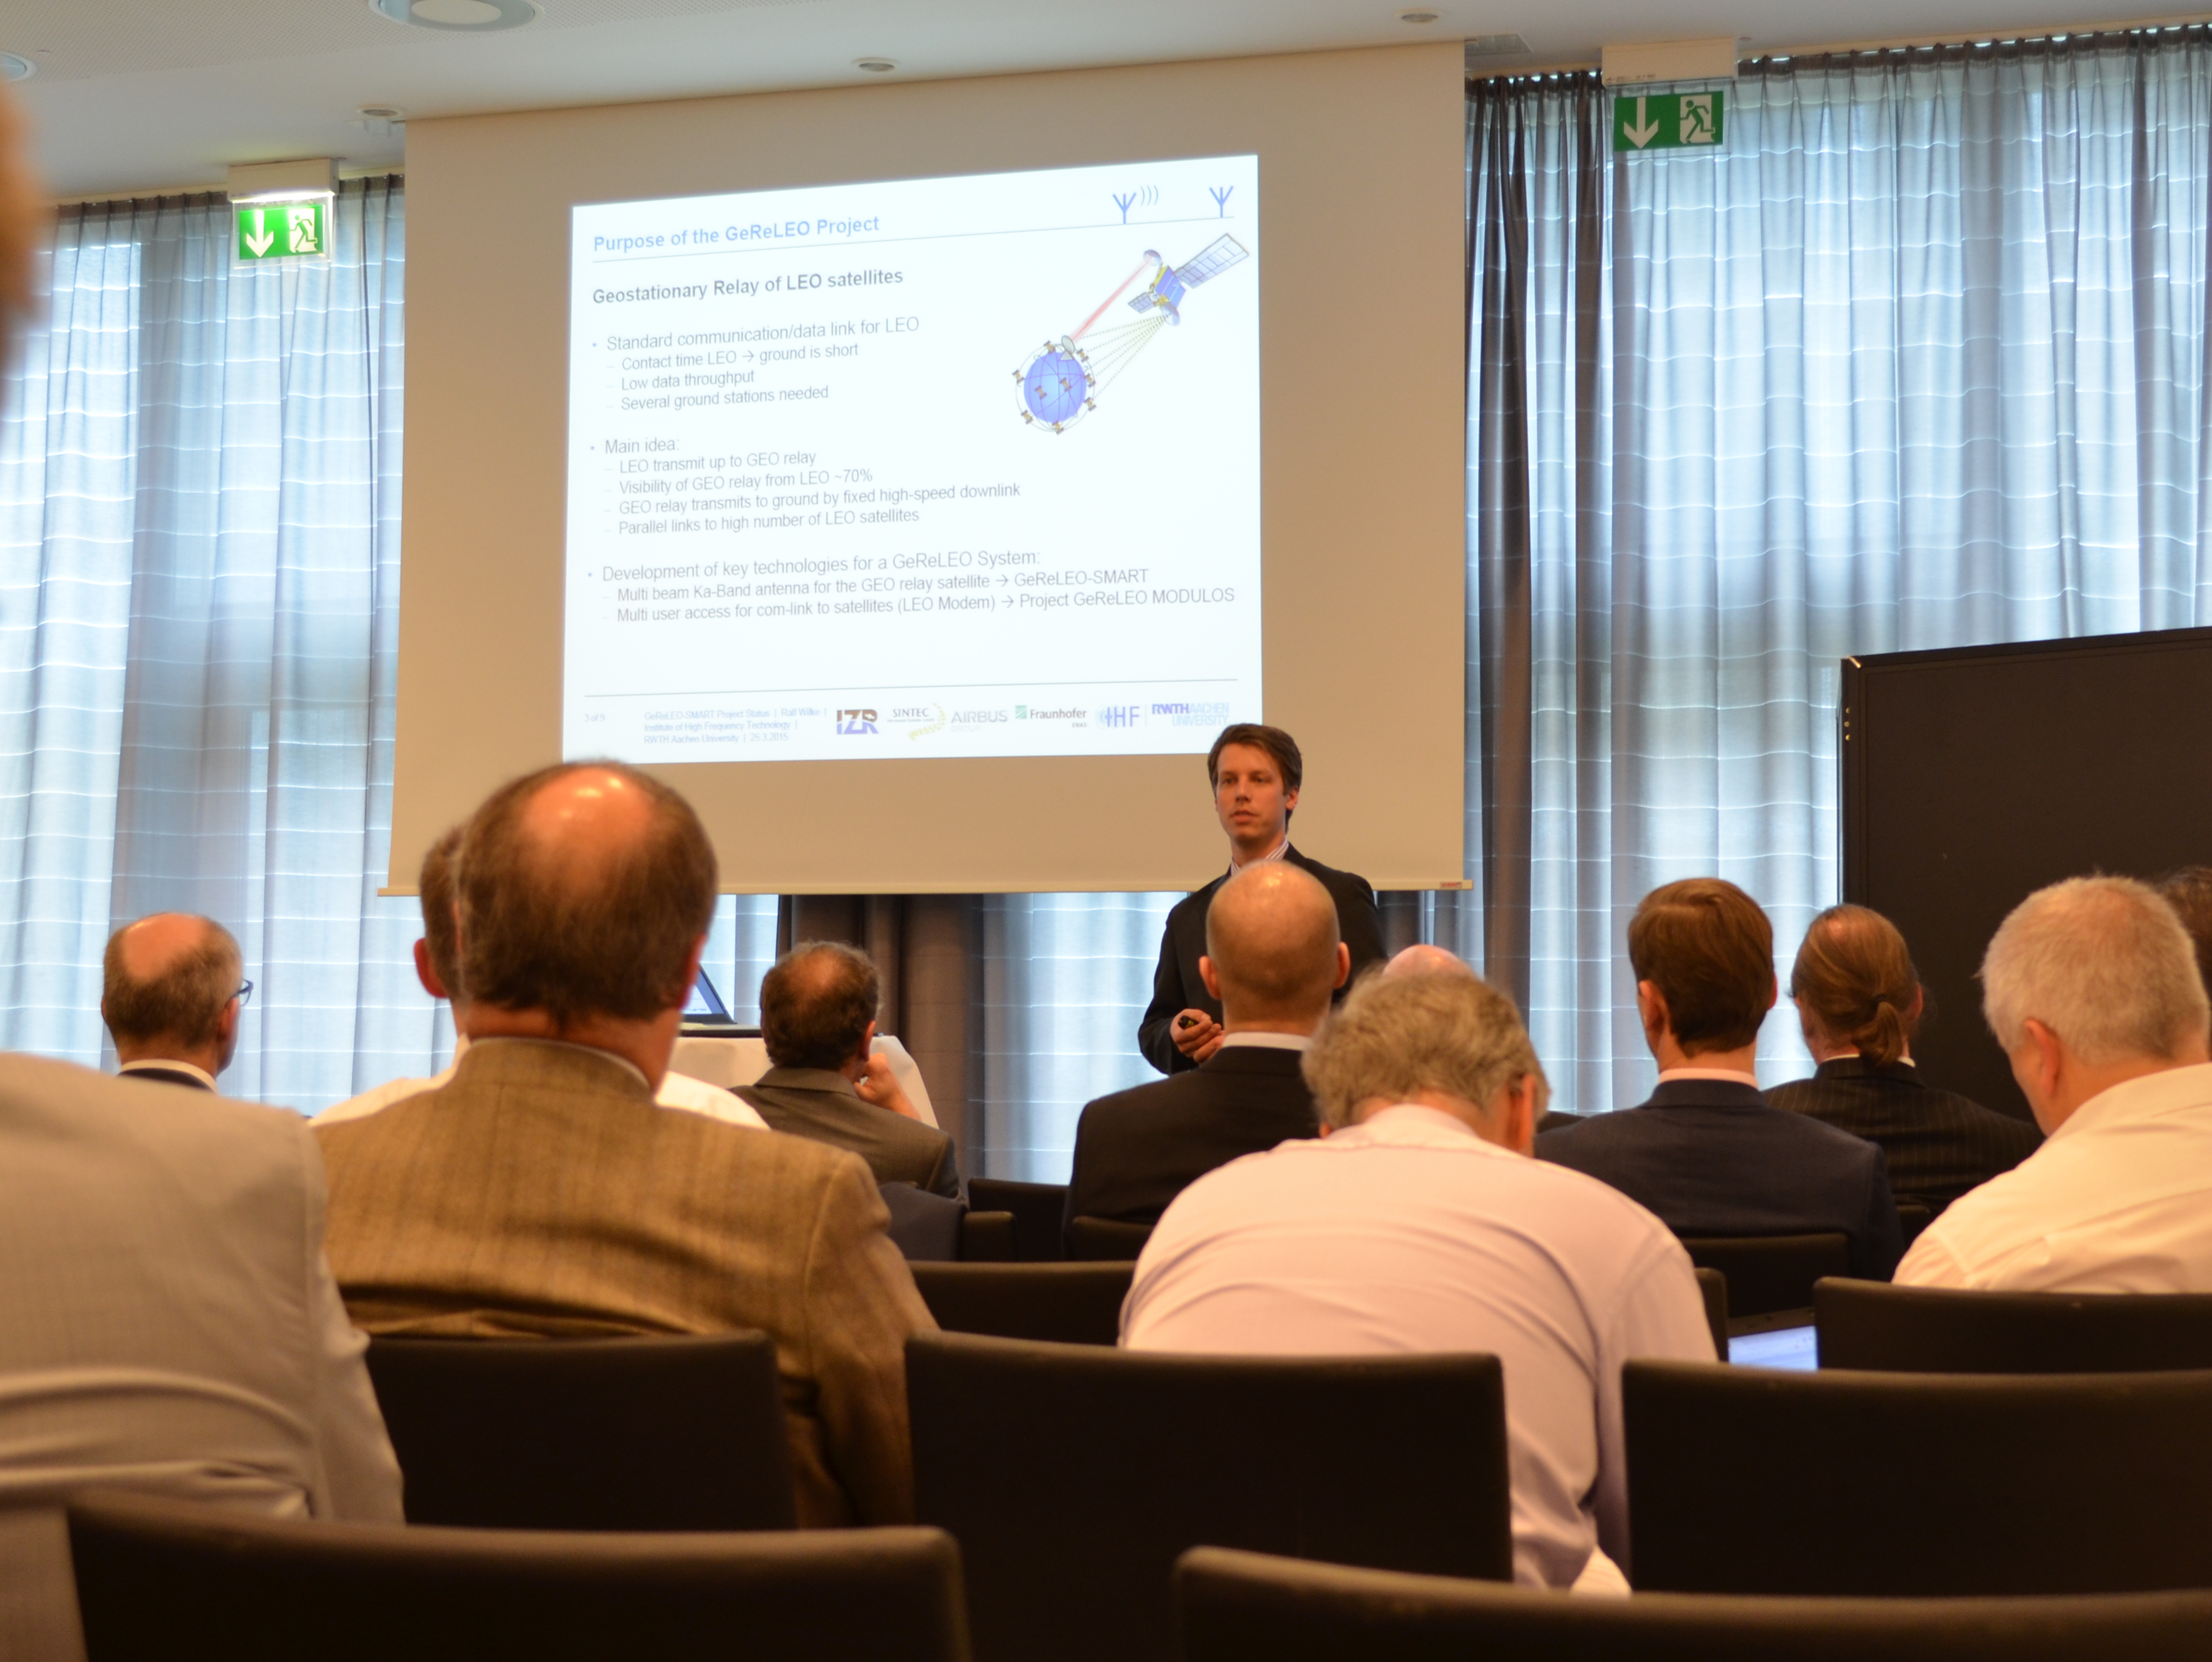 4th nationale conference satellite communication in Germany, Bonn